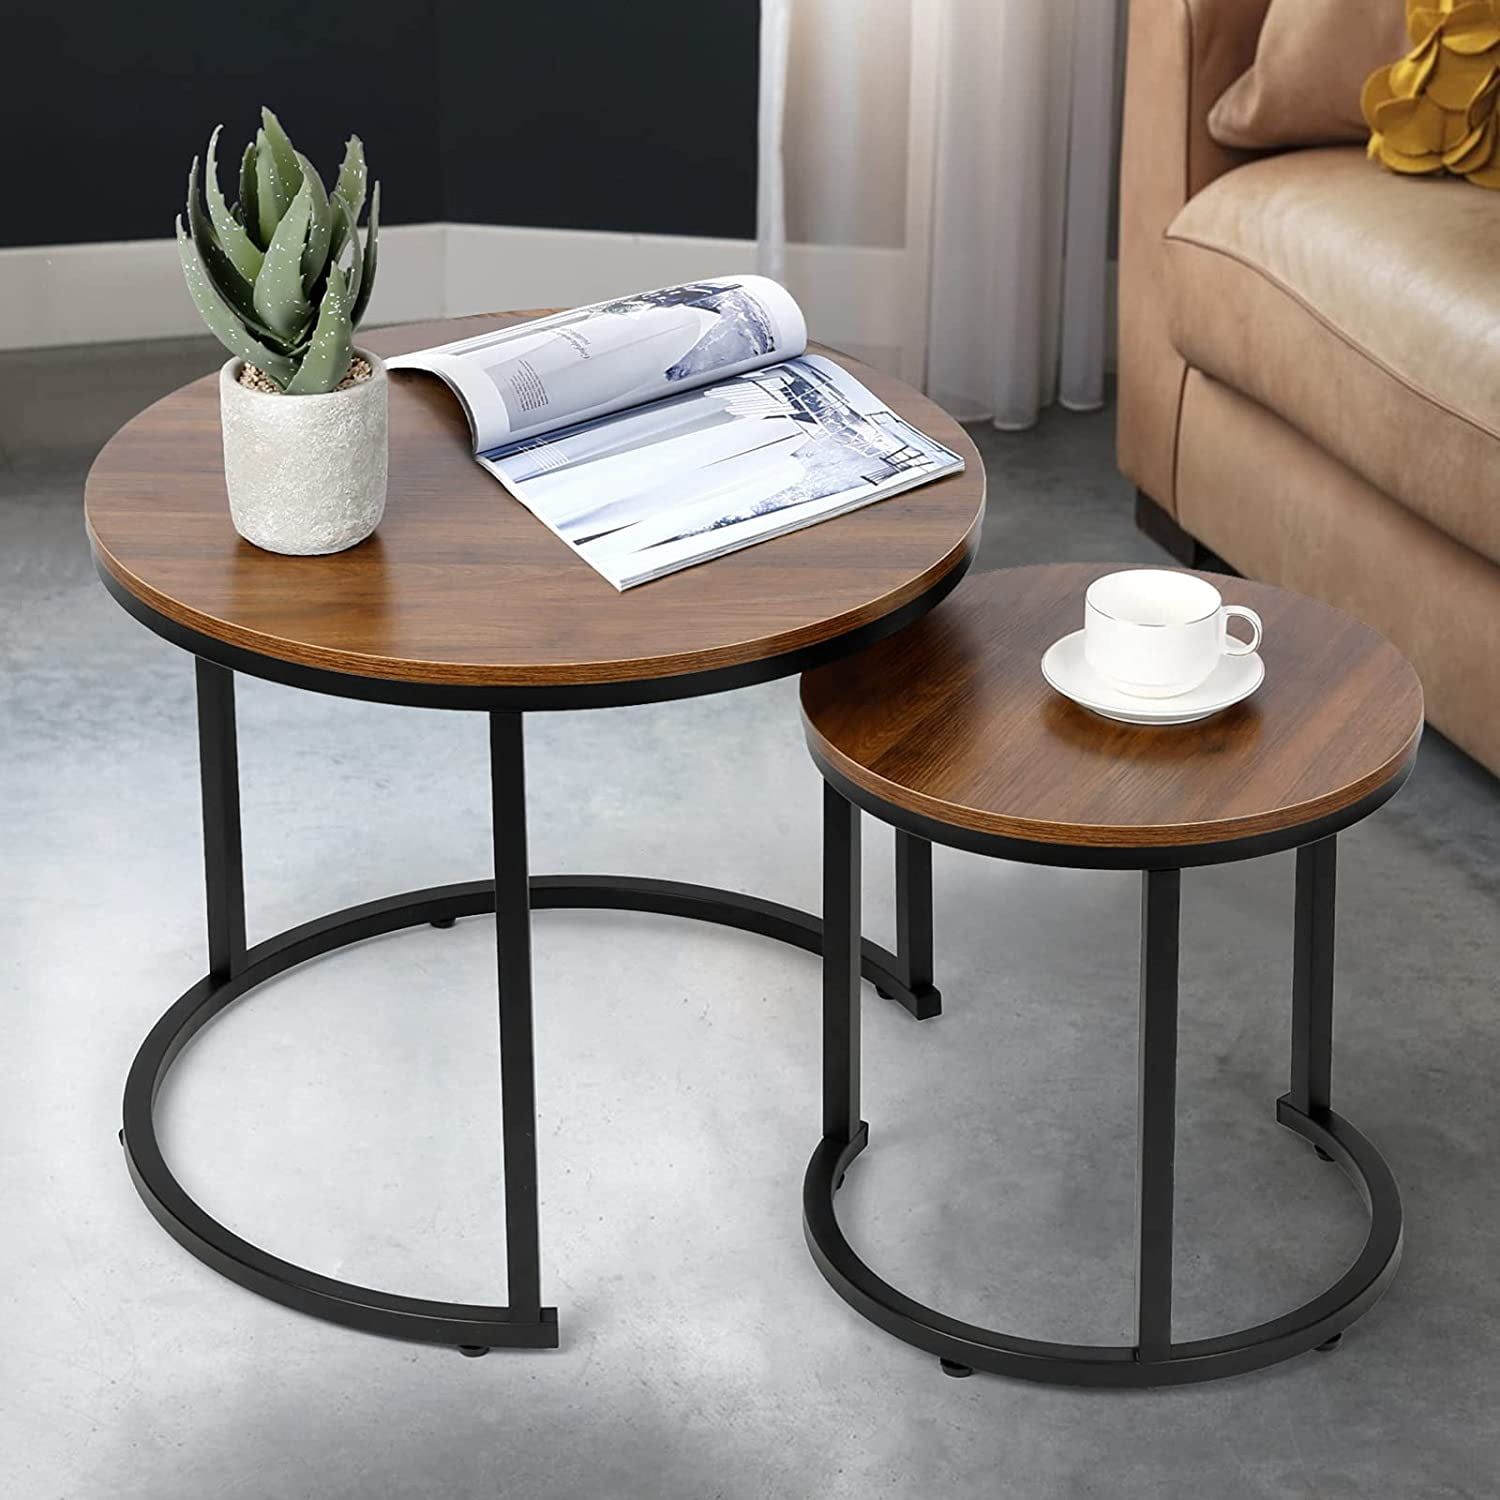 Amzdeal Modern Nesting Coffee Tables, Walnut Round Top, Set Of 2, Brown With Regard To Nesting Coffee Tables (Gallery 6 of 20)